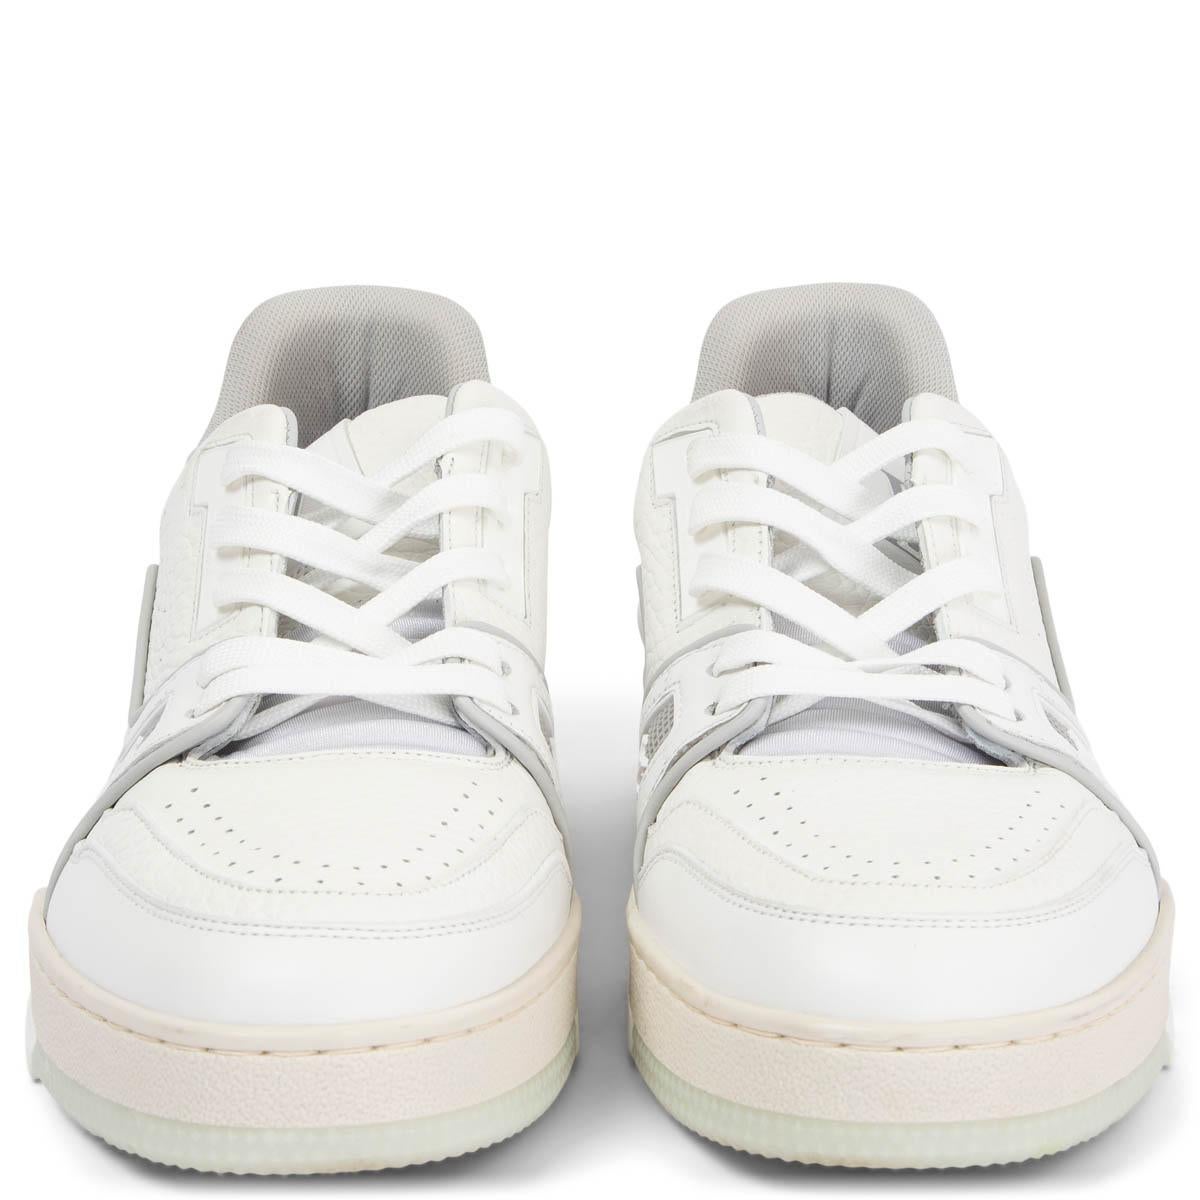 100% authentic Louis Vuitton x Virgil Abloh LV Trainers sneakers in white leather with light grey and beige details. Have been worn once or twice and are in excellent condition.

This monochrome version of the LV Trainer sneaker combines smooth and